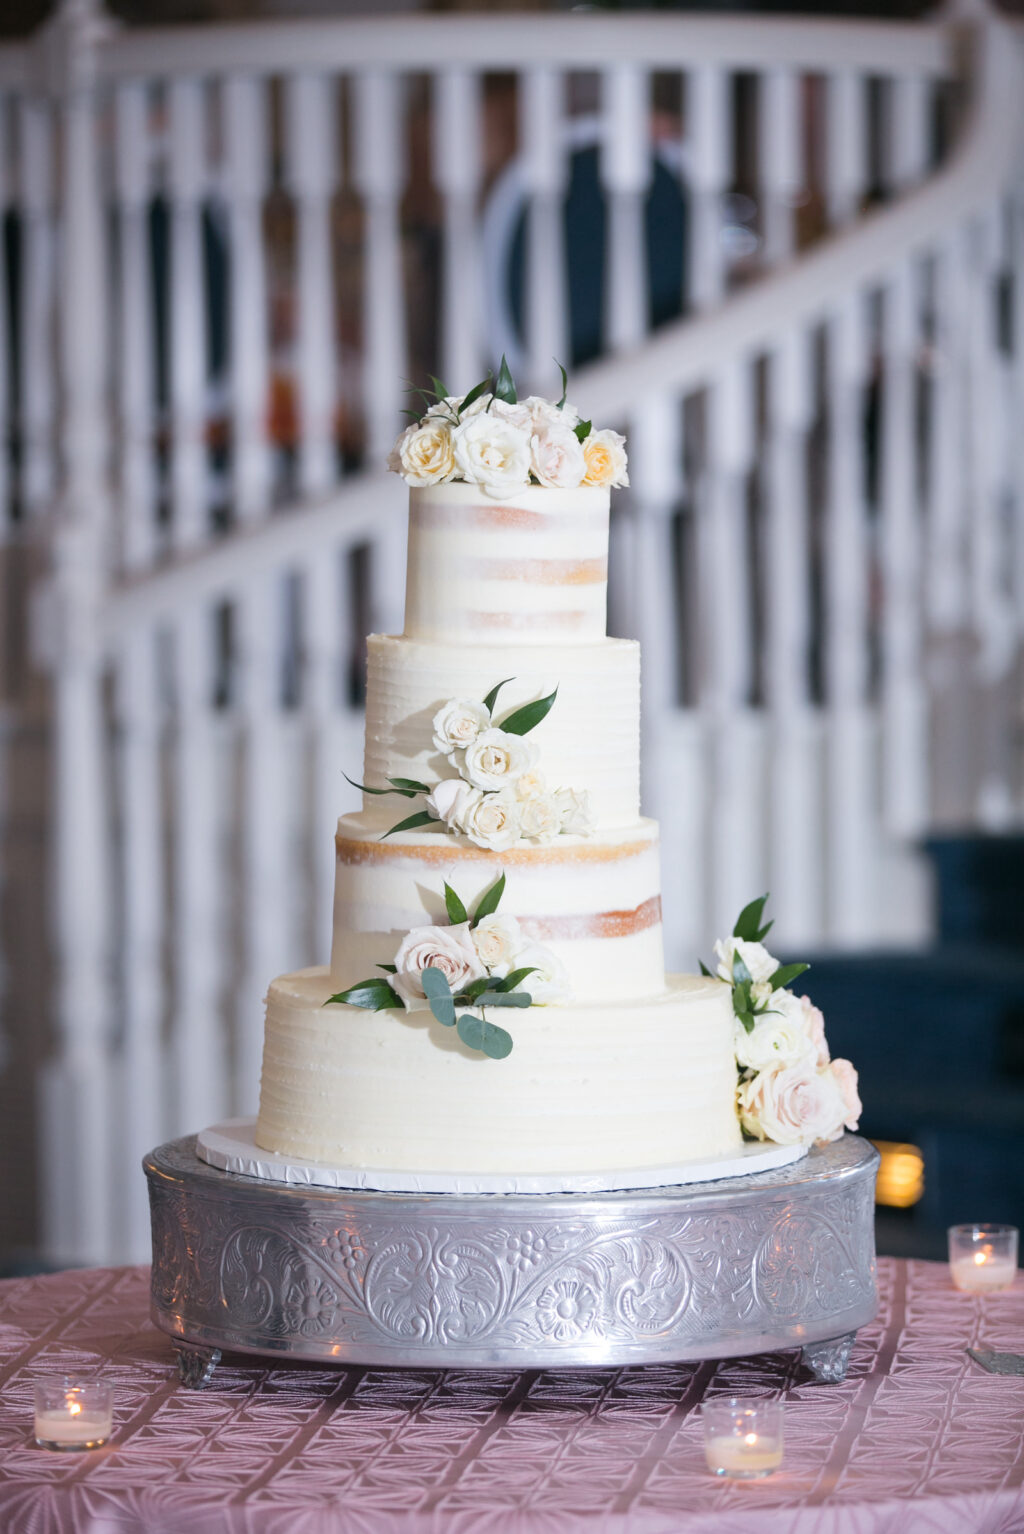 Four Tier Semi Naked Wedding Cake with White Floral and Greenery Garnish